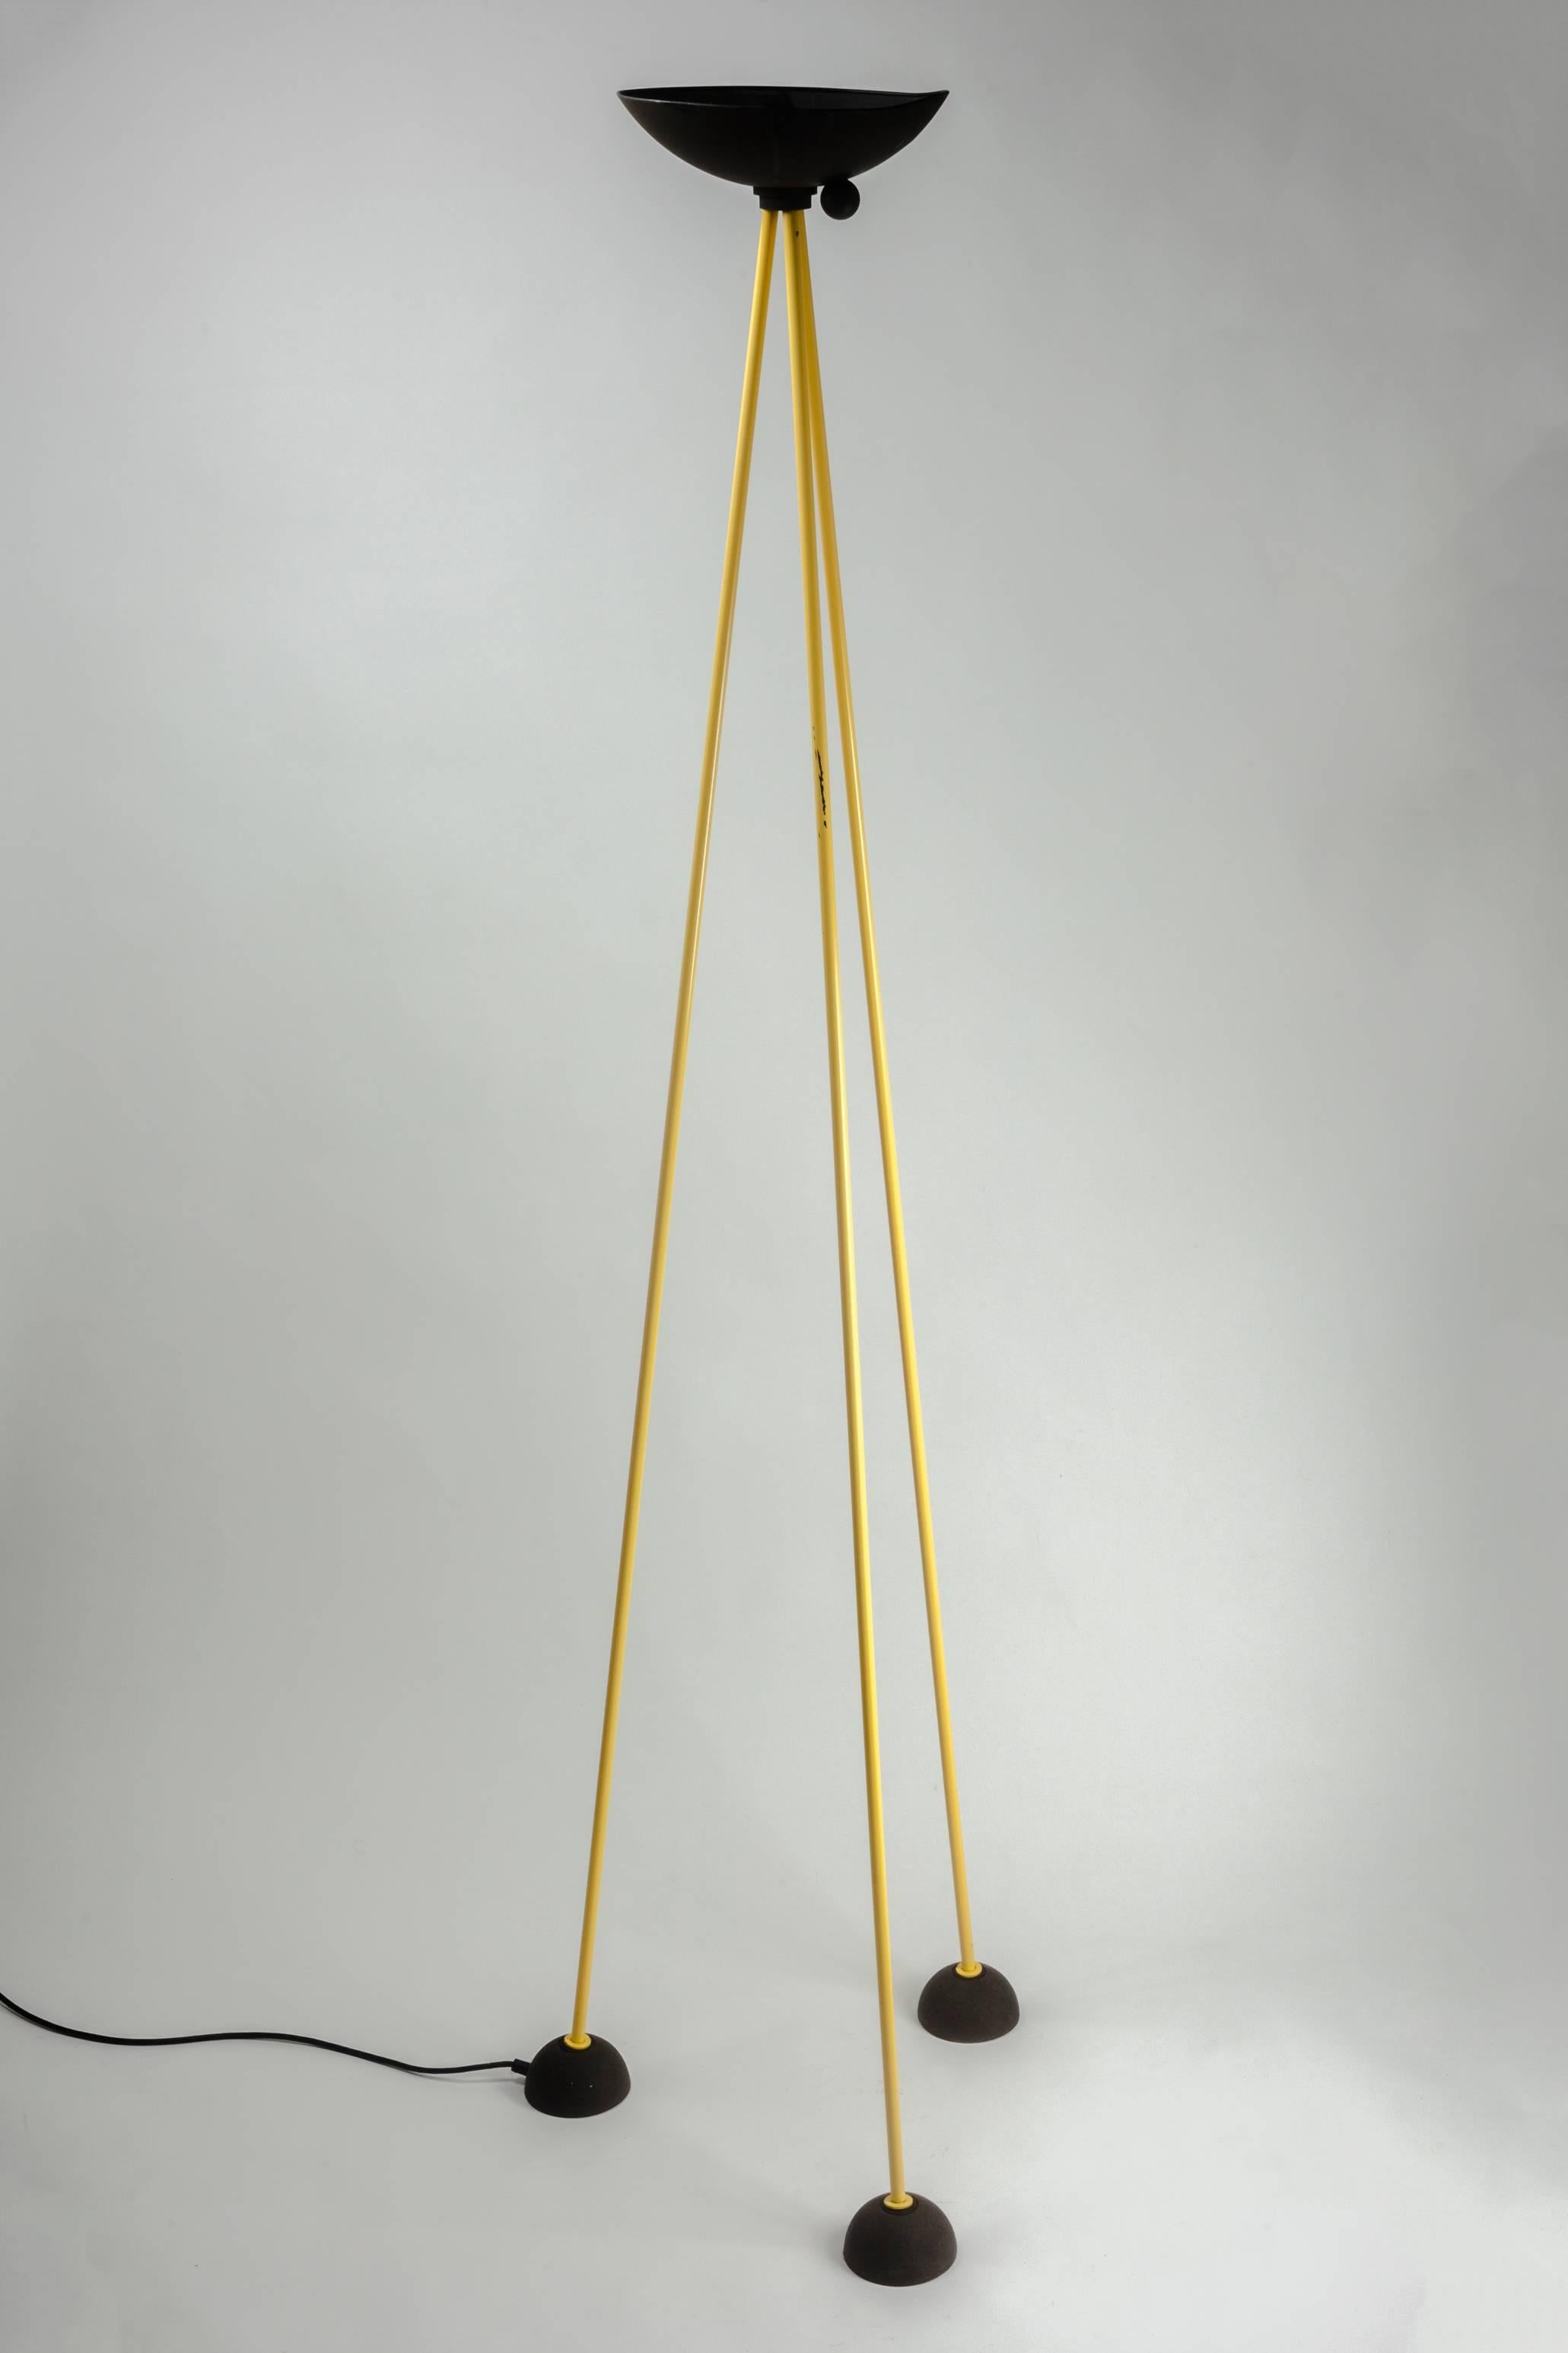 Post-Modern Floor Lamp in the style of Memphis by Koch and Lowy in Black and Yellow, 1980s